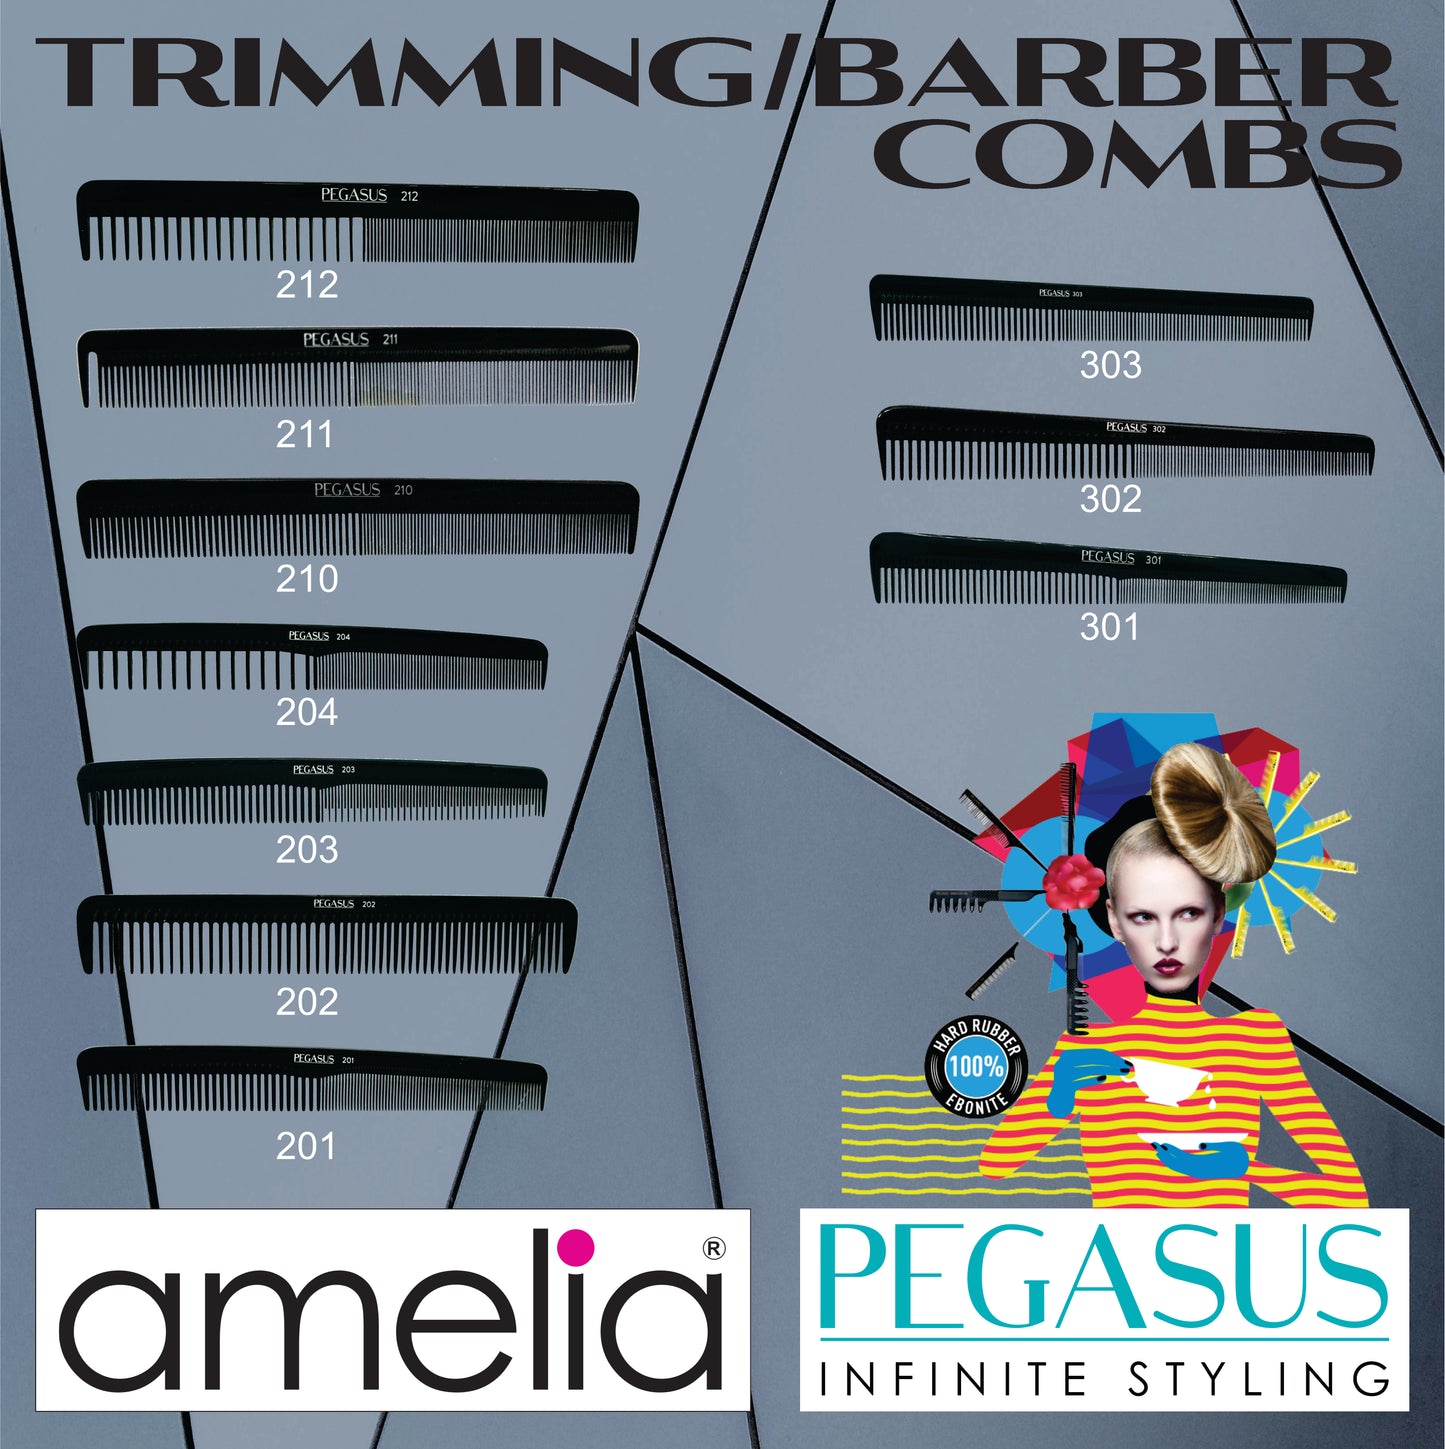 Pegasus 204, 7in Hard Rubber Hair Trimming/Cutting Com with Extra Course/Fine Teeth, Anti Static, Heat and Chemically Resistant, Wet Hair, Everyday Grooming Comb | Peines de goma dura - Black